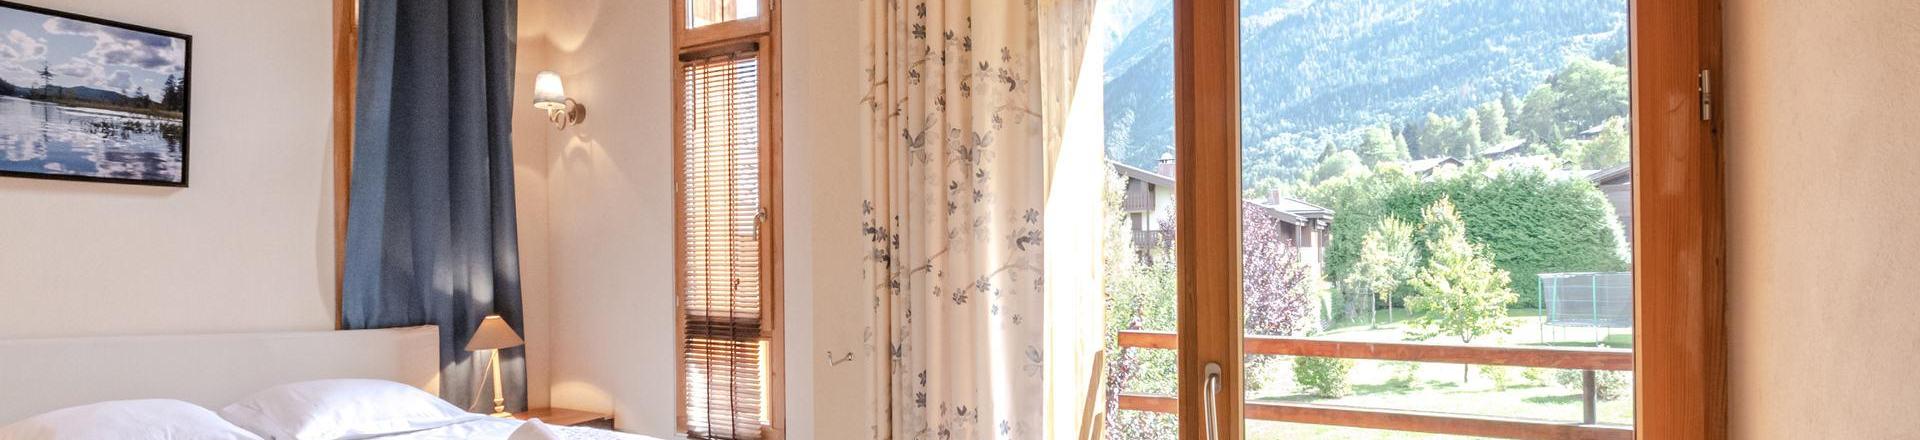 Rent in ski resort 7 room chalet 12 people - Chalet Athina - Les Houches - Bedroom